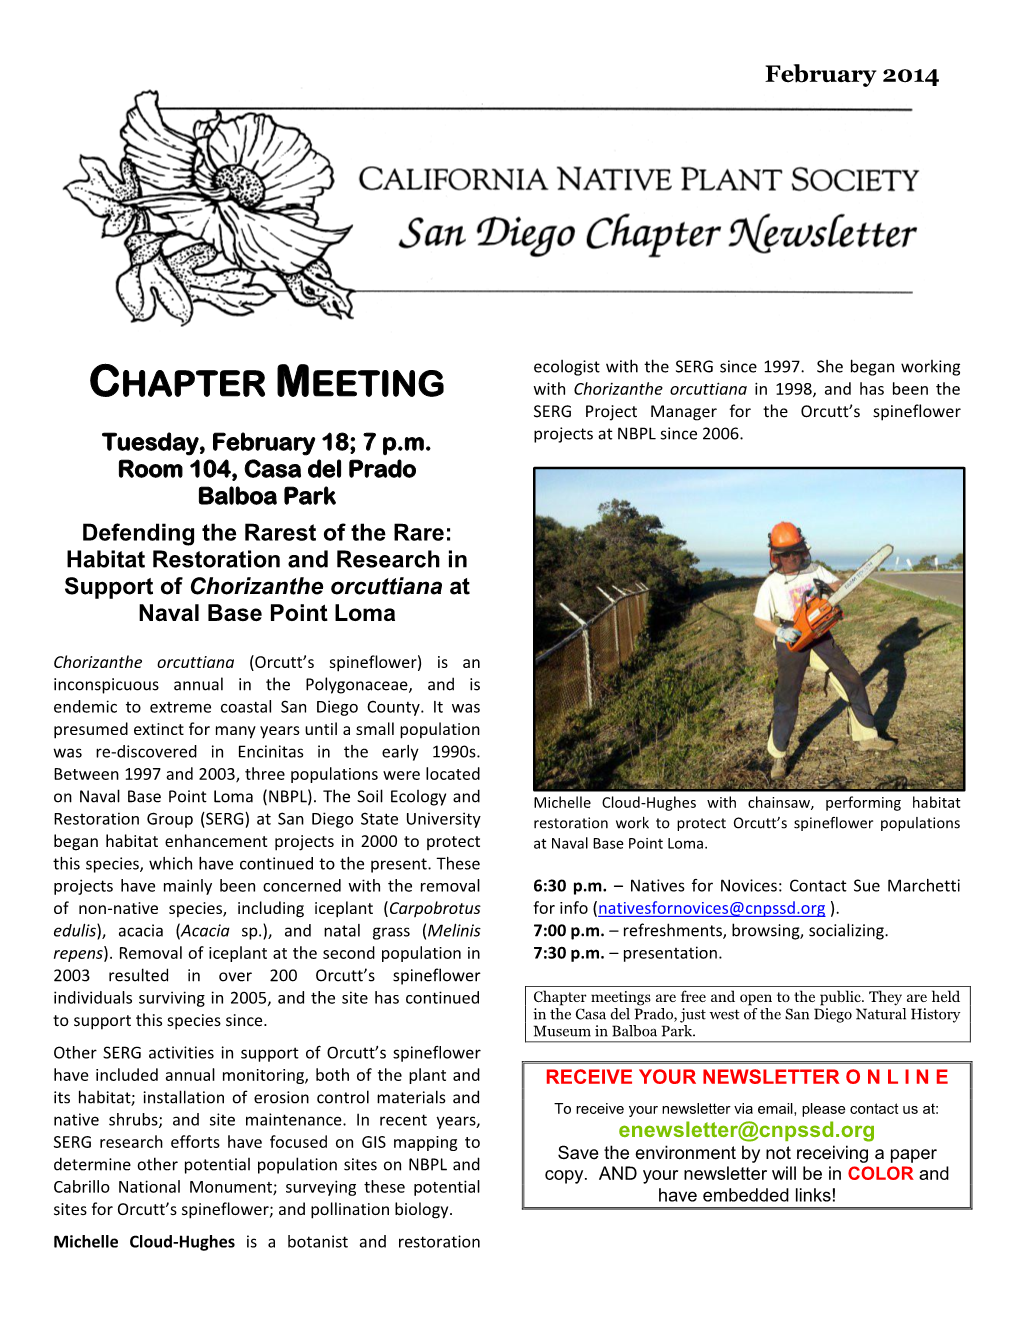 CHAPTER MEETING with Chorizanthe Orcuttiana in 1998, and Has Been the SERG Project Manager for the Orcutt’S Spineflower Tuesday, February 18; 7 P.M